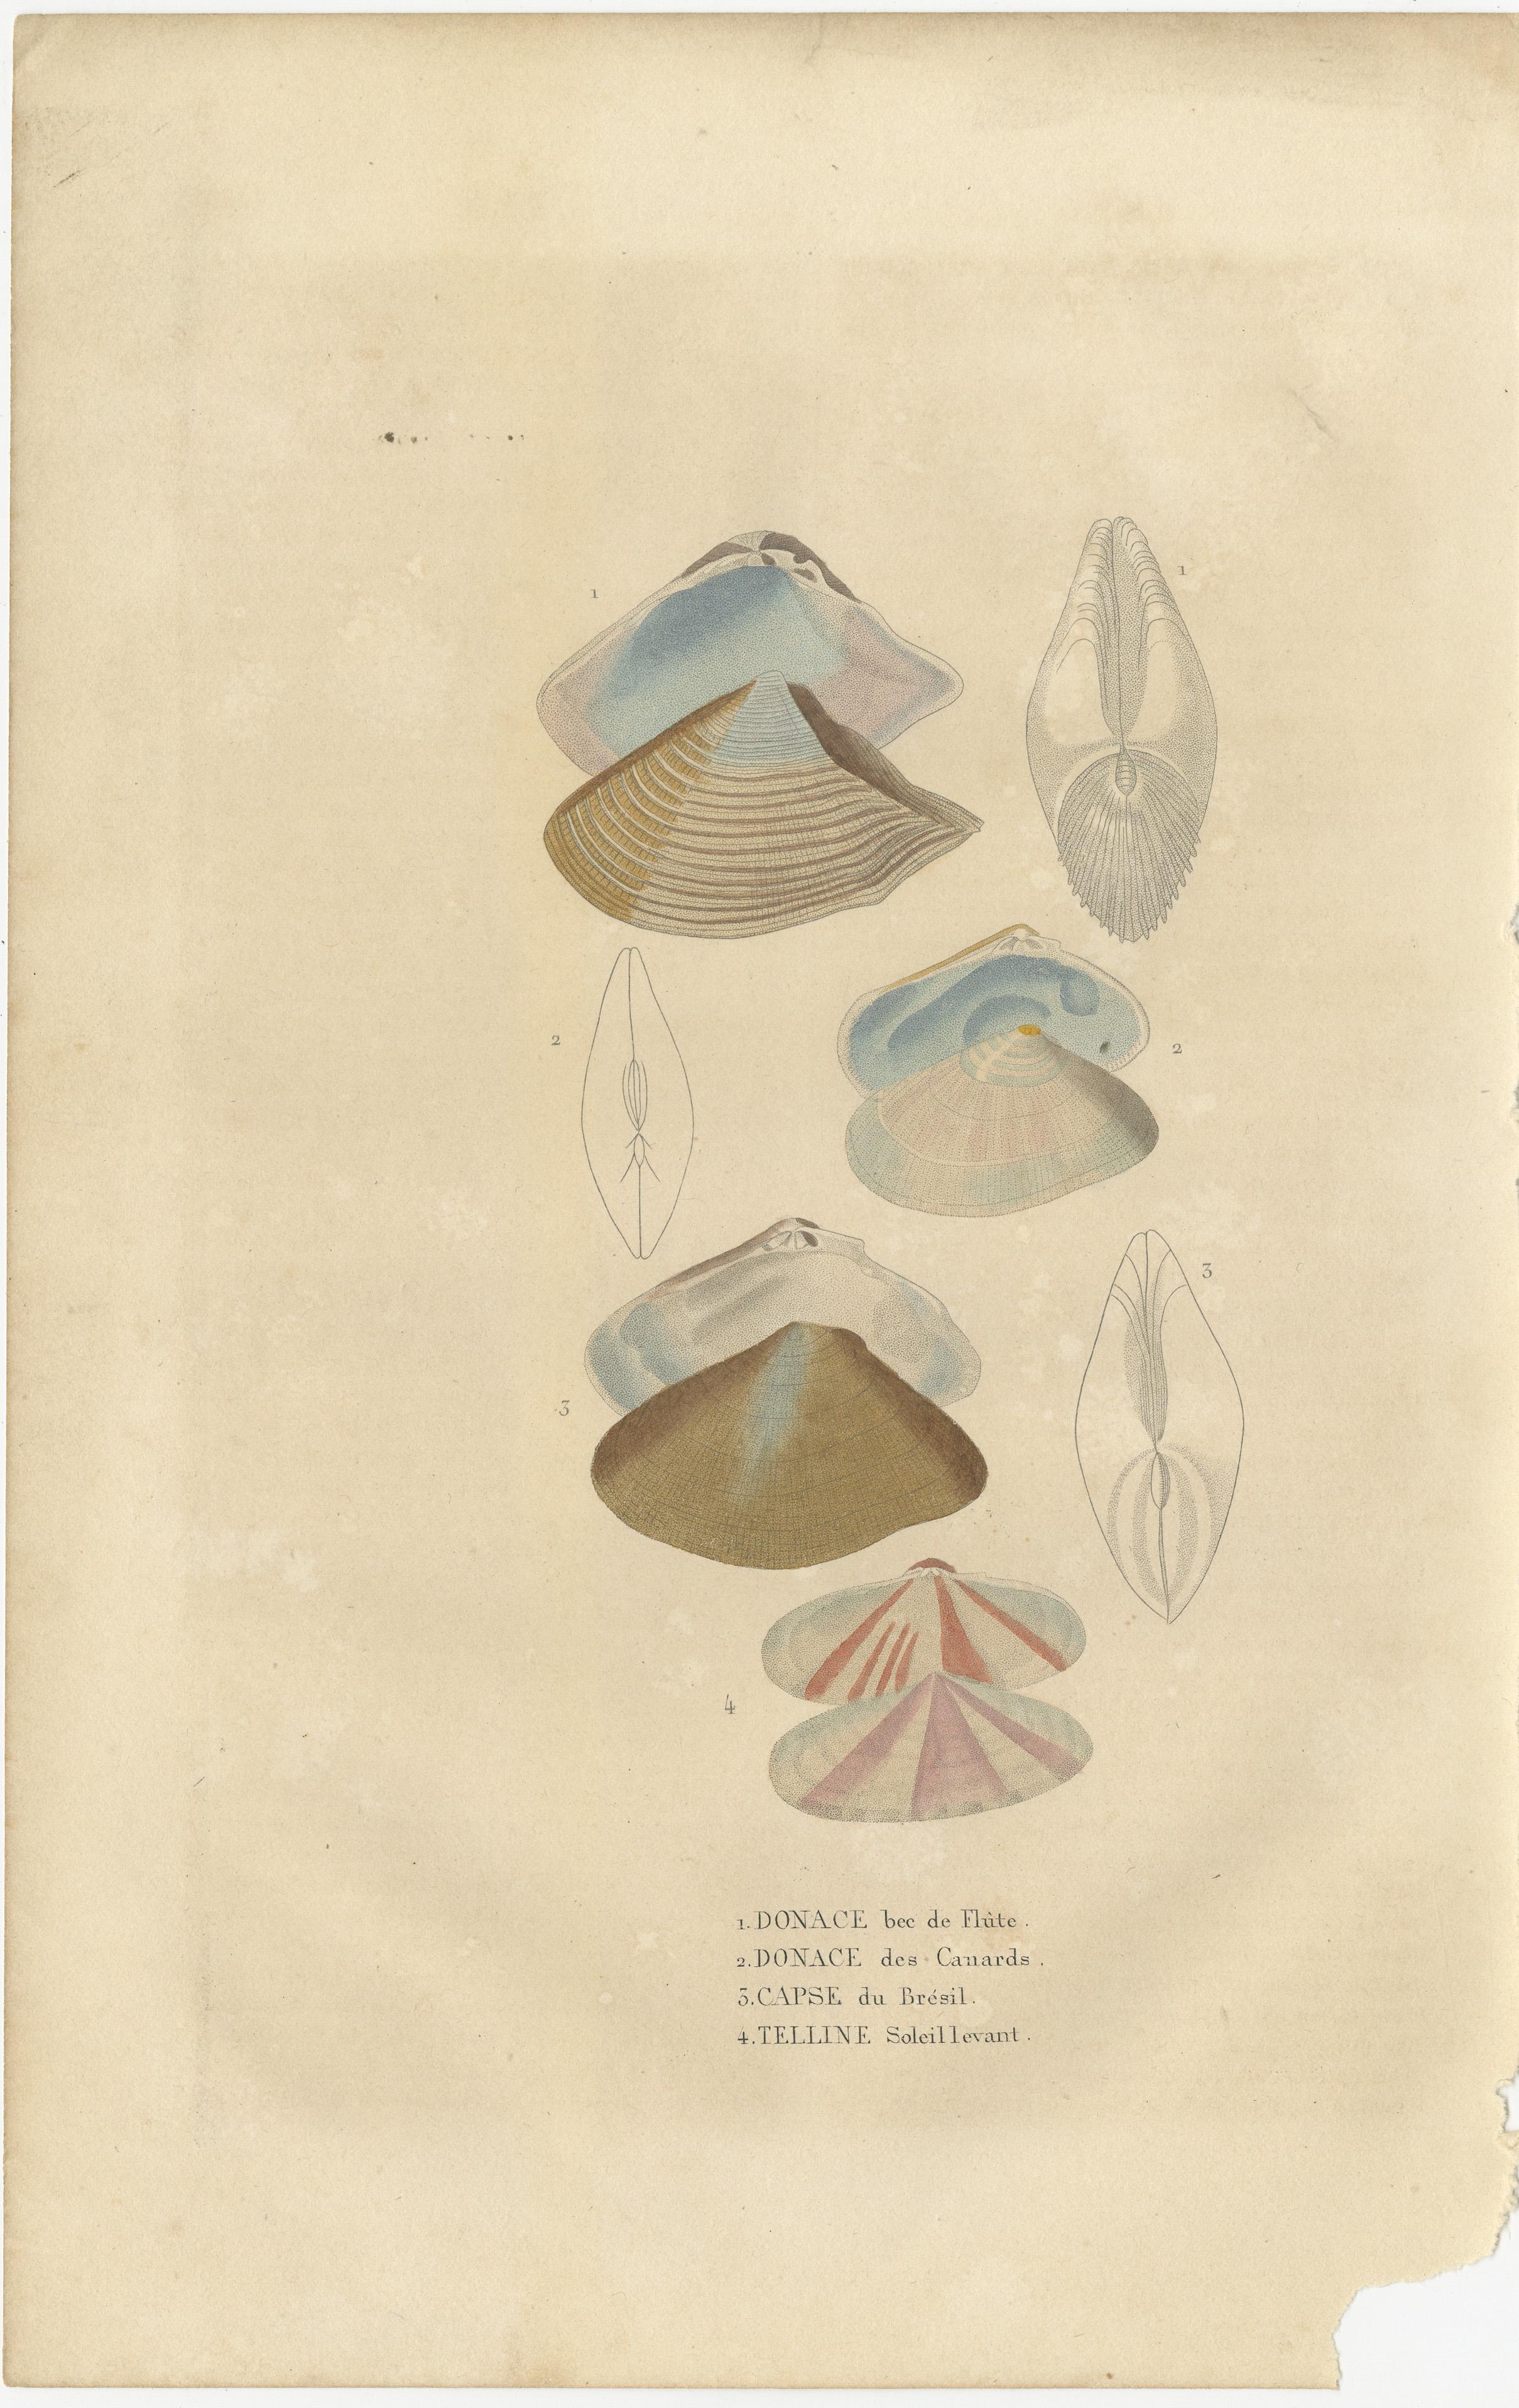 These two original antique prints are hand-colored engravings of various bivalve mollusks, which are a type of shellfish with a compressed body enclosed within a hinged shell. These specific illustrations are from the 'Dictionnaire Classique des